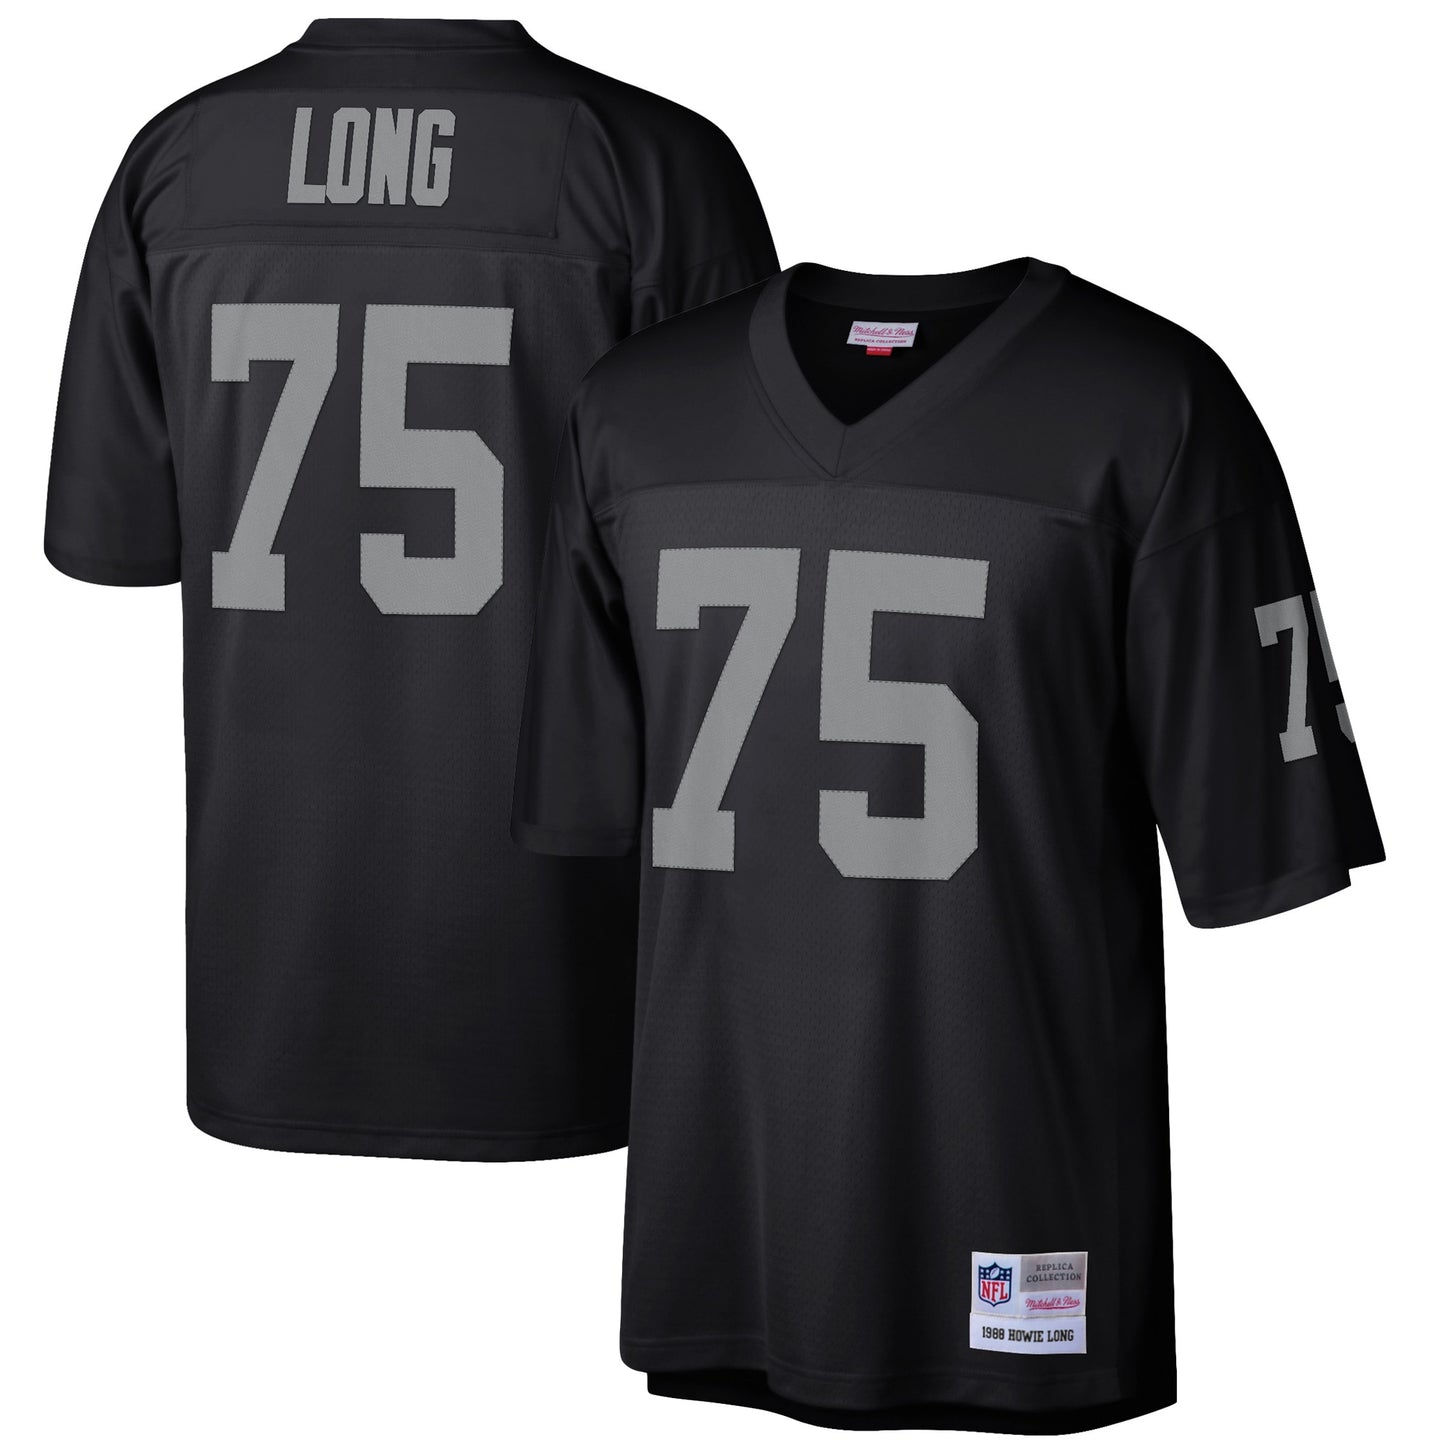 Howie Long Las Vegas Raiders Mitchell & Ness Retired Player Legacy Replica Jersey - Black